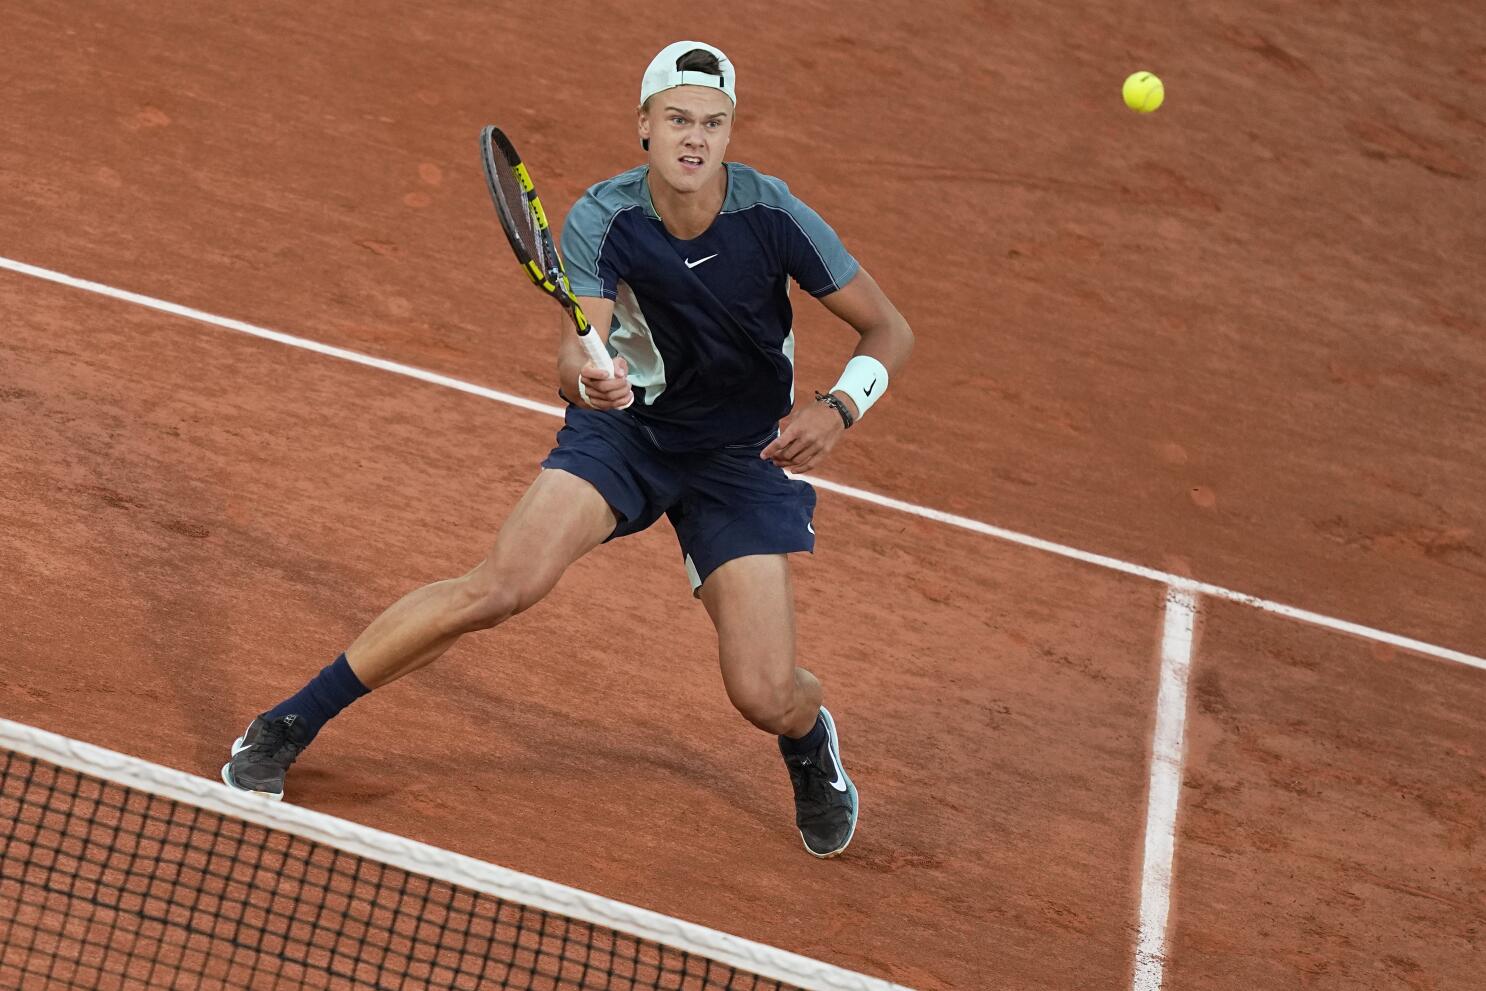 Medvedev making progress on clay, to face Tsitsipas in Italian Open  semifinals - The San Diego Union-Tribune